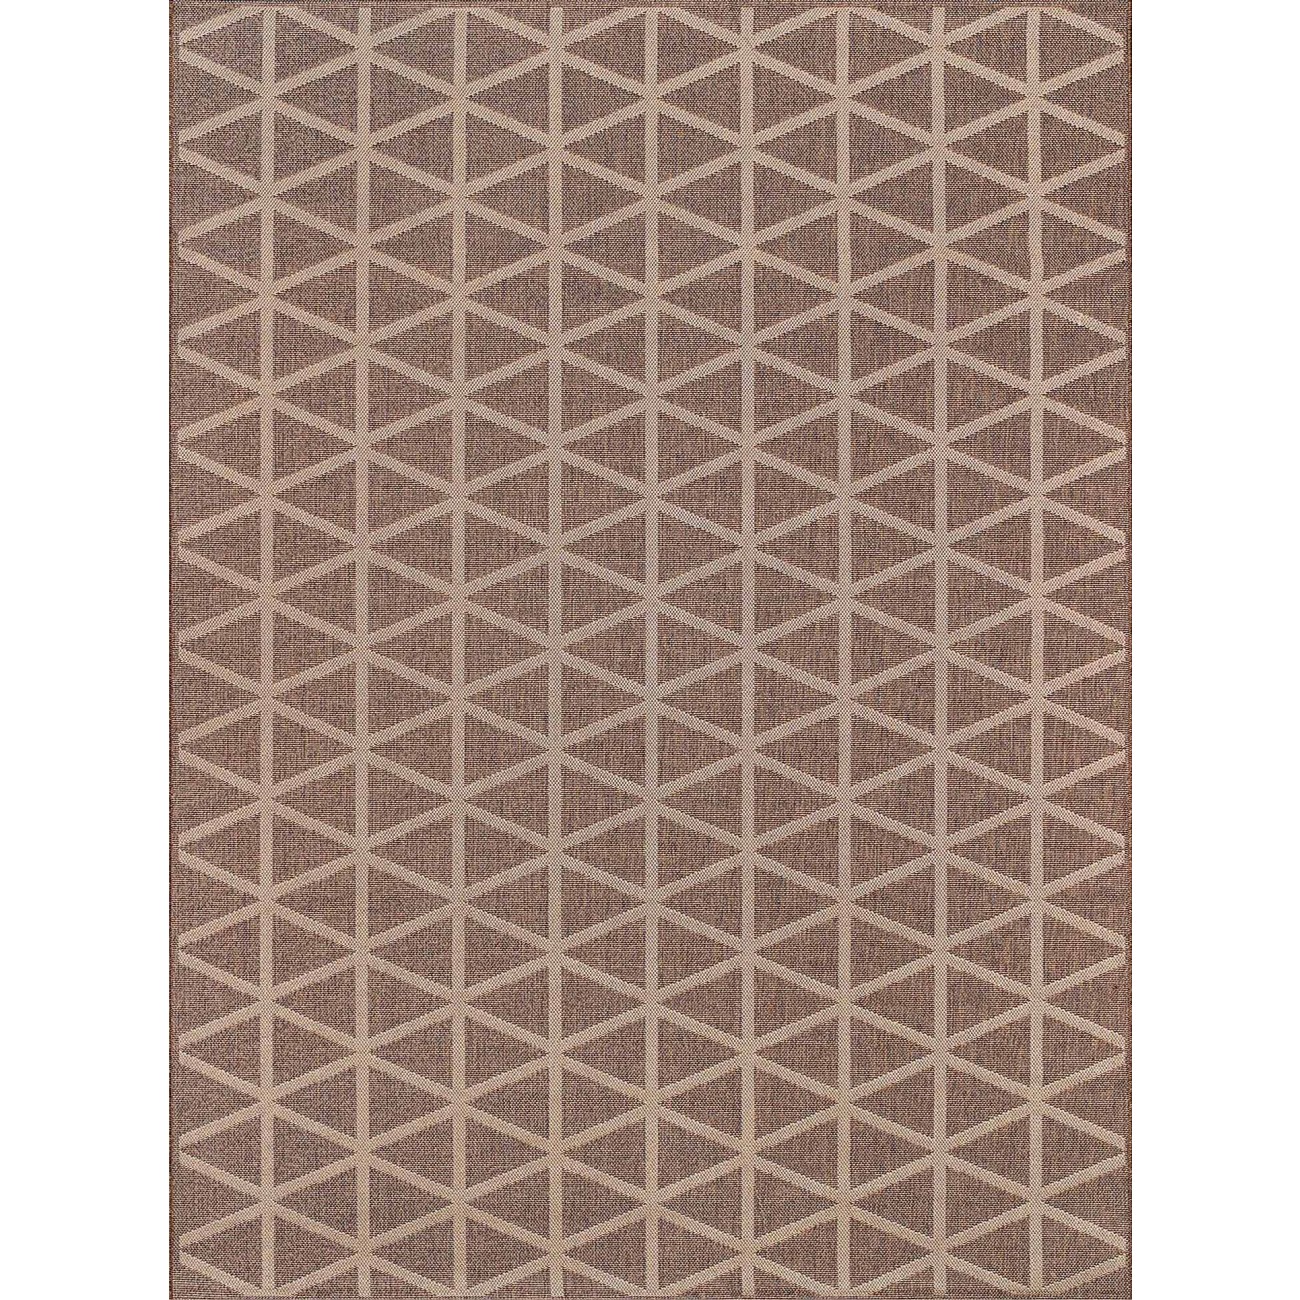 Tapete Eco Nature Anis - 100x150